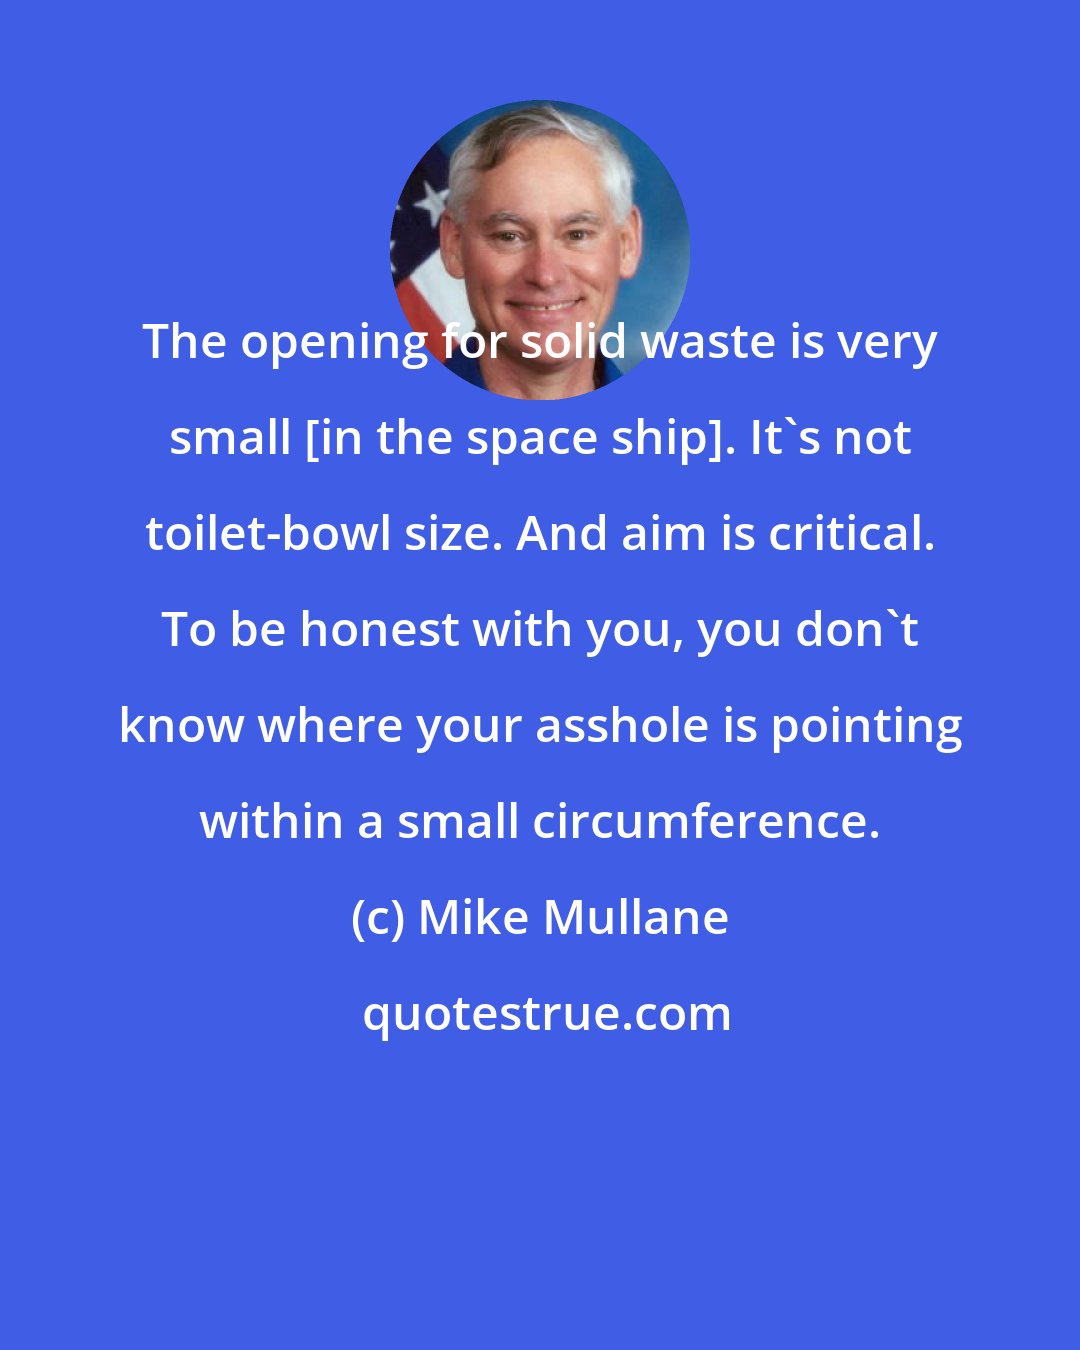 Mike Mullane: The opening for solid waste is very small [in the space ship]. It's not toilet-bowl size. And aim is critical. To be honest with you, you don't know where your asshole is pointing within a small circumference.